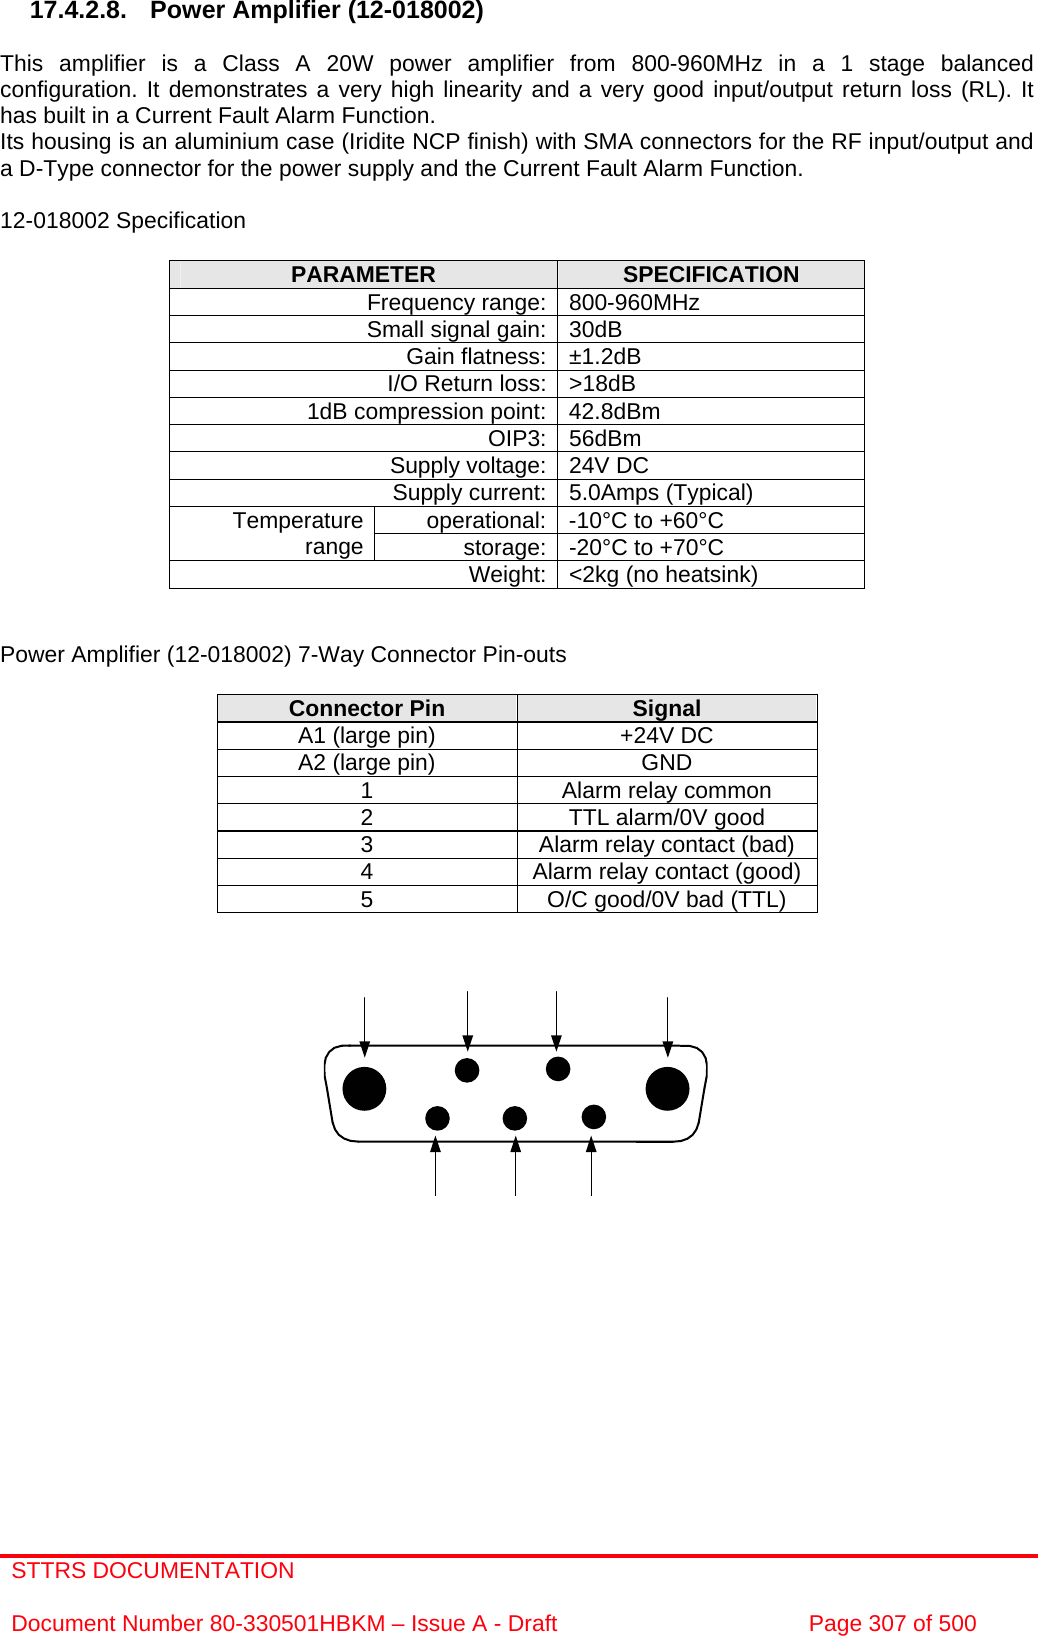 STTRS DOCUMENTATION  Document Number 80-330501HBKM – Issue A - Draft  Page 307 of 500   17.4.2.8.  Power Amplifier (12-018002)  This amplifier is a Class A 20W power amplifier from 800-960MHz in a 1 stage balanced configuration. It demonstrates a very high linearity and a very good input/output return loss (RL). It has built in a Current Fault Alarm Function. Its housing is an aluminium case (Iridite NCP finish) with SMA connectors for the RF input/output and a D-Type connector for the power supply and the Current Fault Alarm Function.  12-018002 Specification  PARAMETER  SPECIFICATION Frequency range: 800-960MHz Small signal gain: 30dB Gain flatness: ±1.2dB I/O Return loss: &gt;18dB 1dB compression point: 42.8dBm OIP3: 56dBm Supply voltage: 24V DC Supply current: 5.0Amps (Typical) operational: -10°C to +60°C Temperature range  storage: -20°C to +70°C Weight: &lt;2kg (no heatsink)   Power Amplifier (12-018002) 7-Way Connector Pin-outs  Connector Pin  Signal A1 (large pin)  +24V DC A2 (large pin)  GND 1  Alarm relay common 2  TTL alarm/0V good 3  Alarm relay contact (bad) 4  Alarm relay contact (good) 5  O/C good/0V bad (TTL)                   